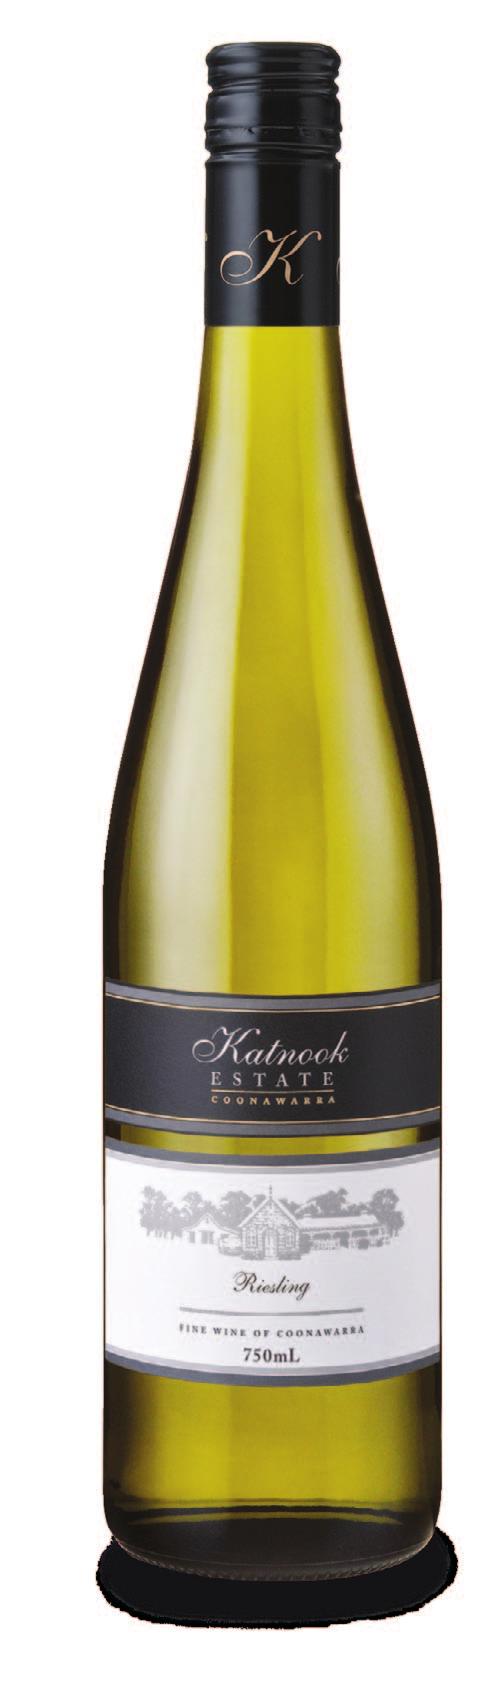 Katnook Estate Riesling 2010 The Katnook Estate range of premium quality, single varietal wines are an expression of the classic and unique characteristics of the Coonawarra wine region.